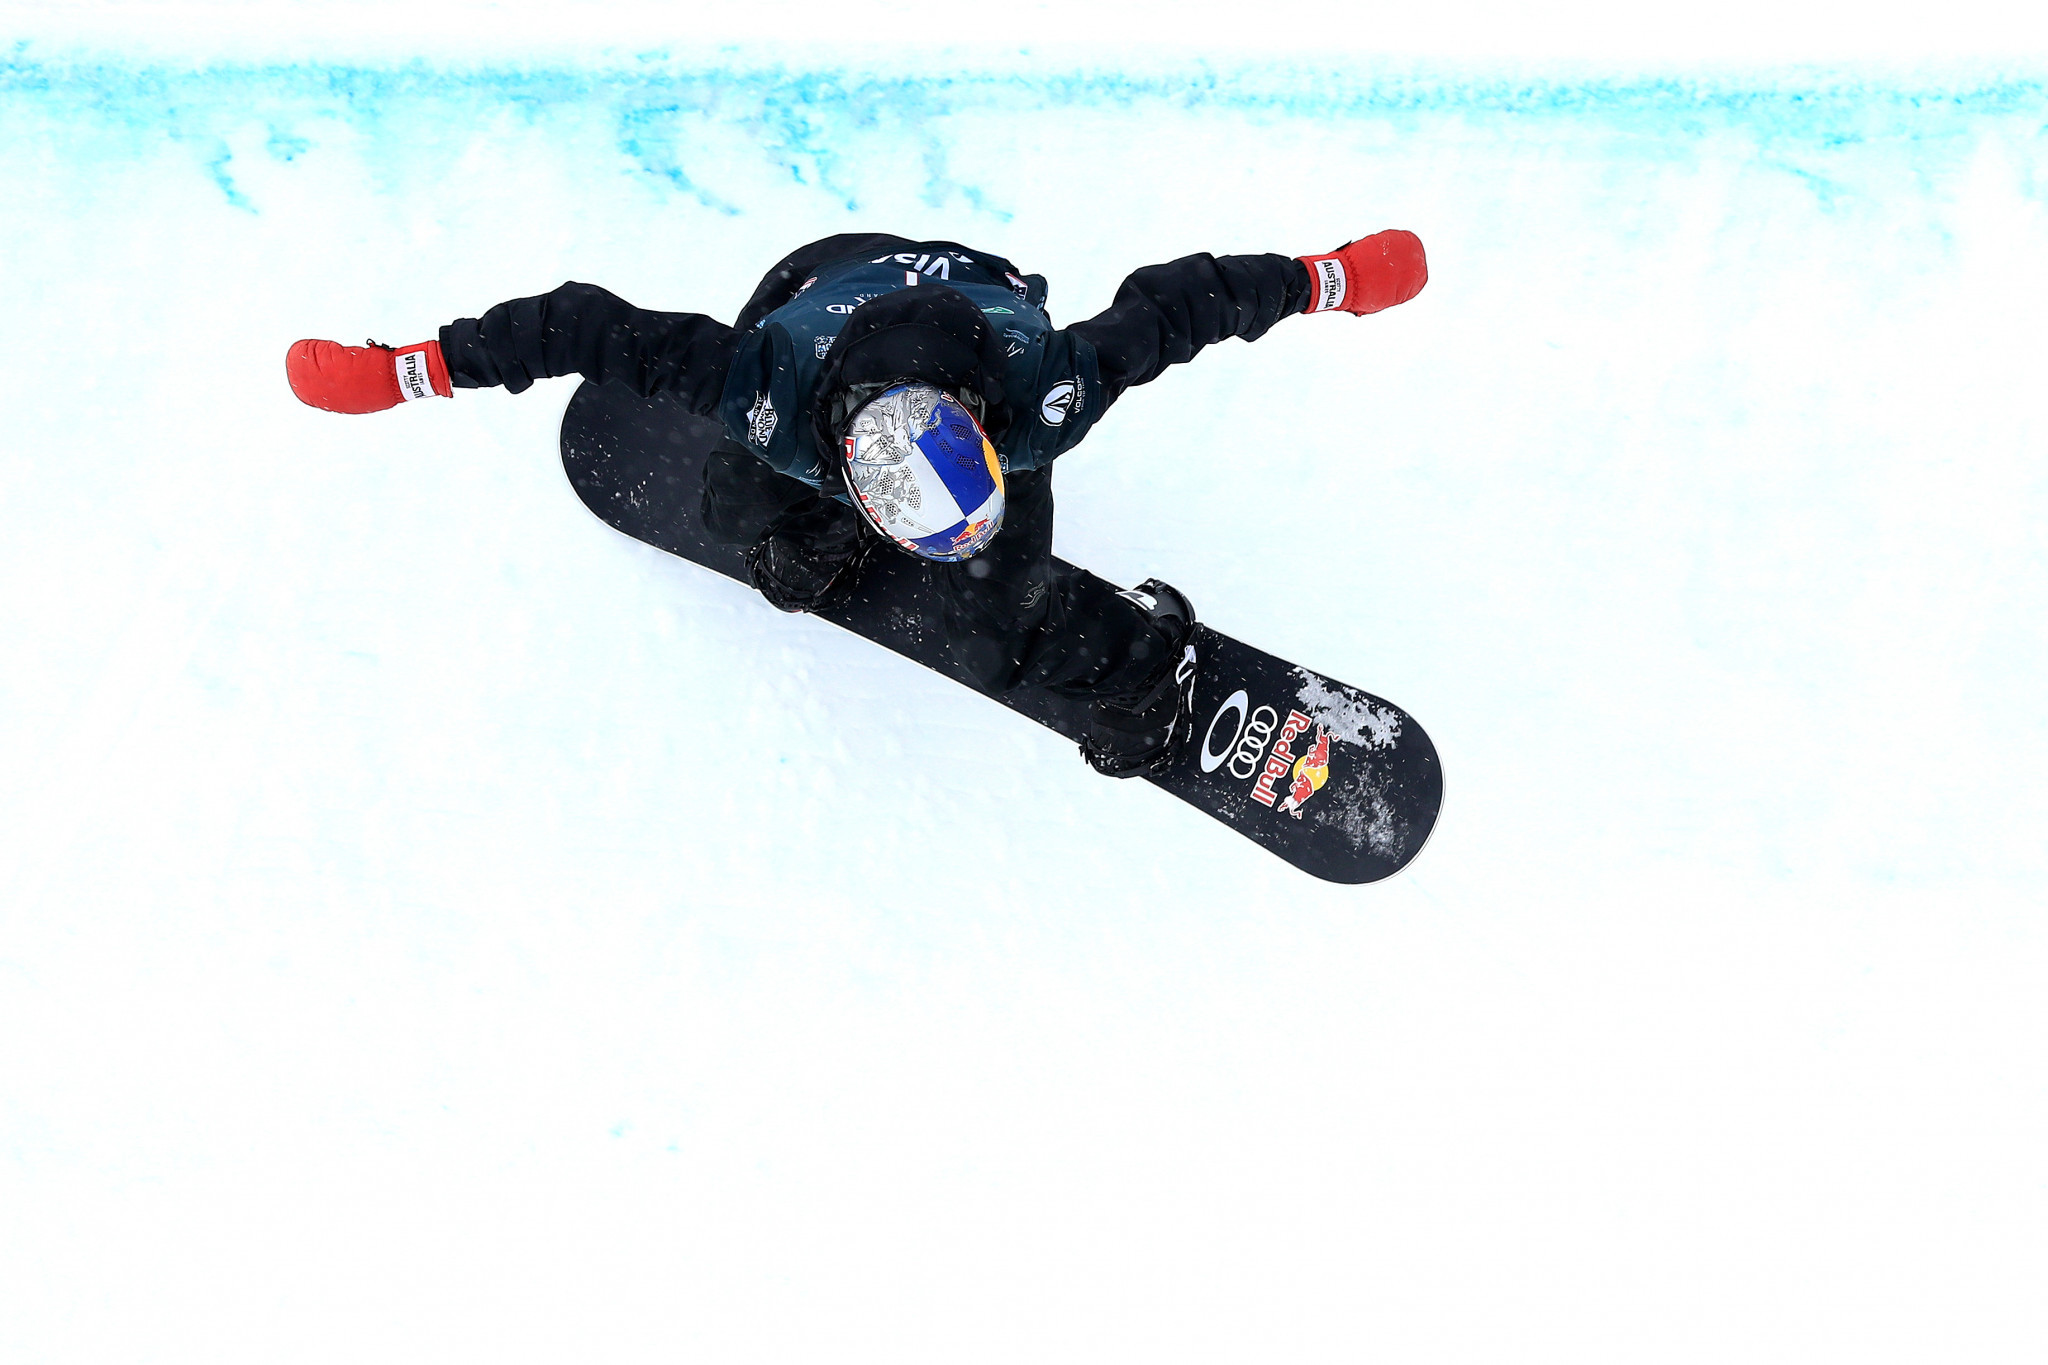 Australia's Scotty James continued his sensational form on the FIS Snowboard World Cup tour ©Getty Images